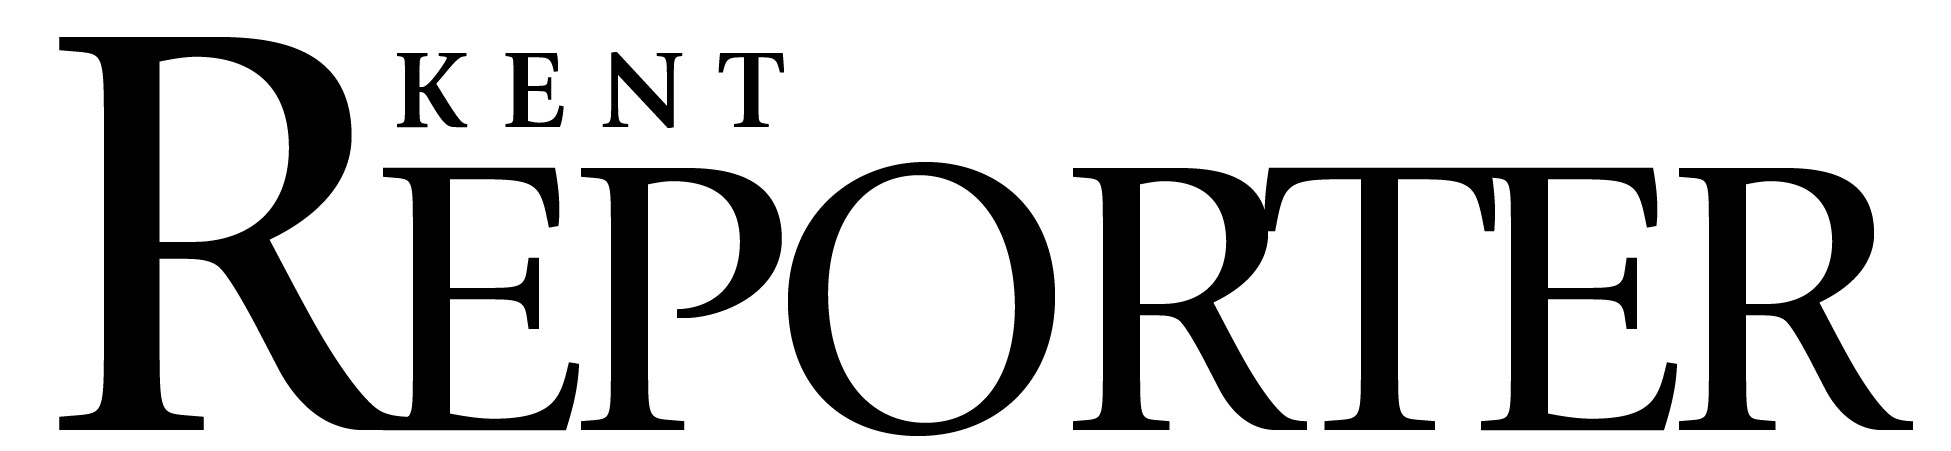 The Kent Reporter